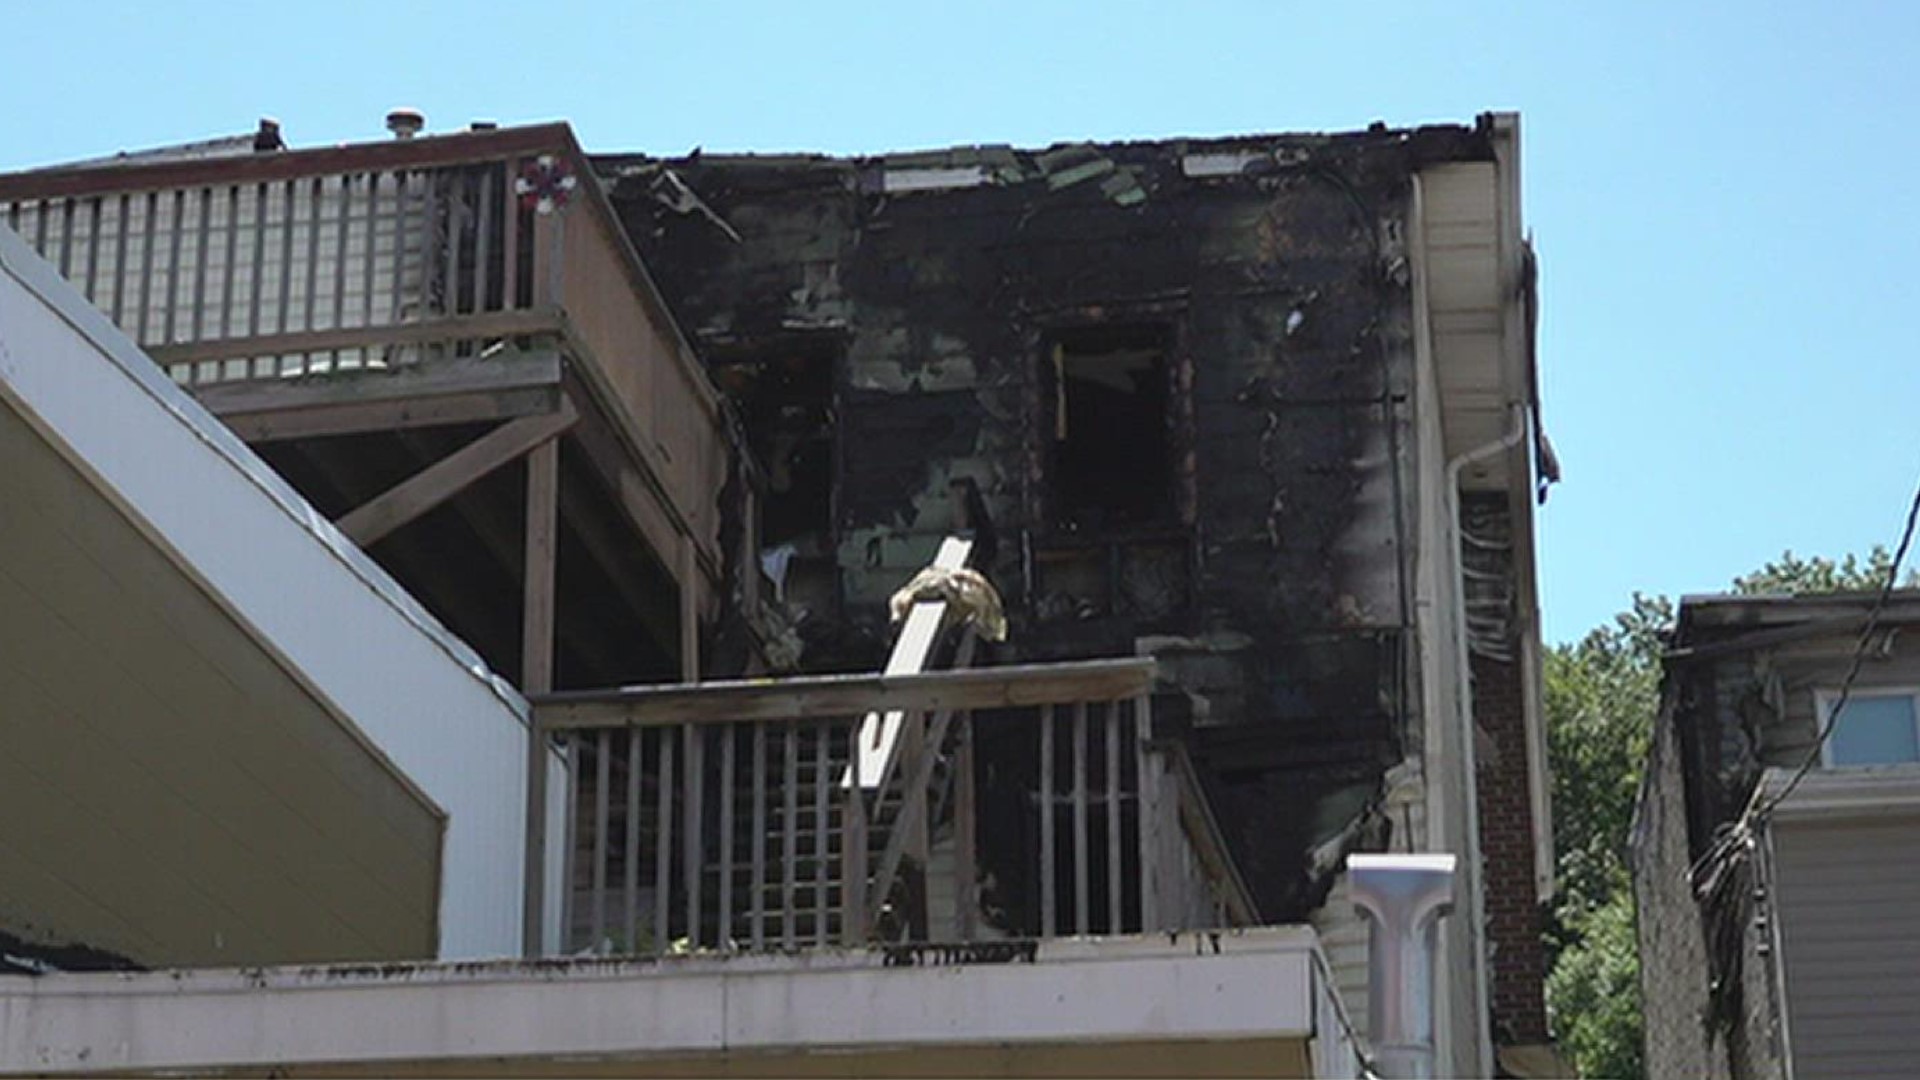 A fire damaged an apartment building early Wednesday morning in Minersville.